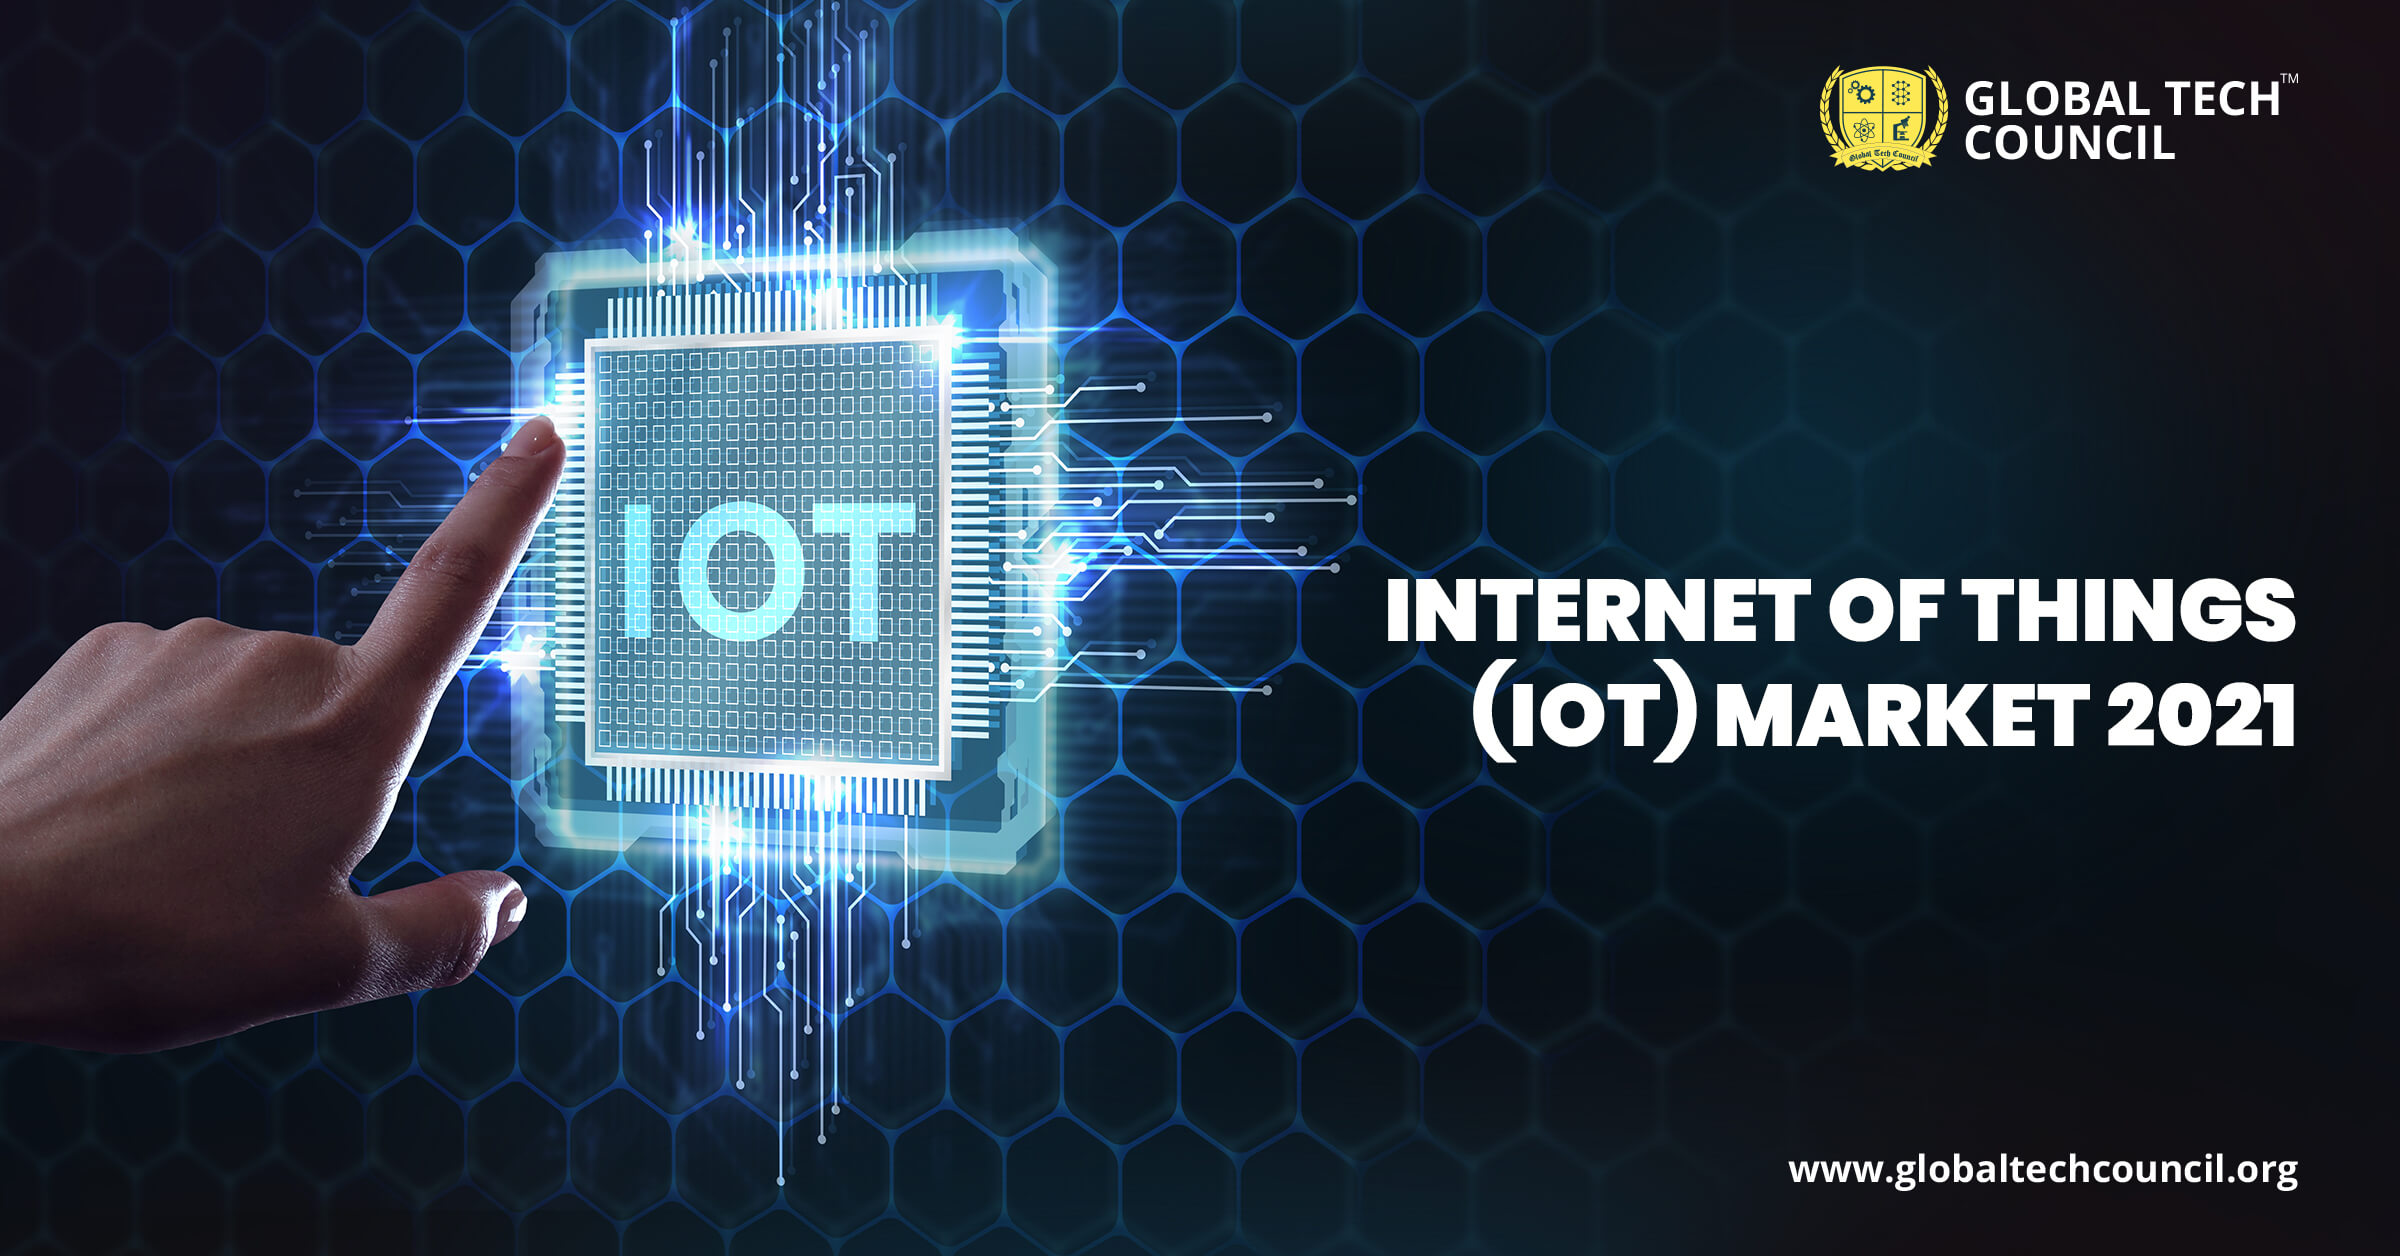 Internet of Things (IoT) Market 2021